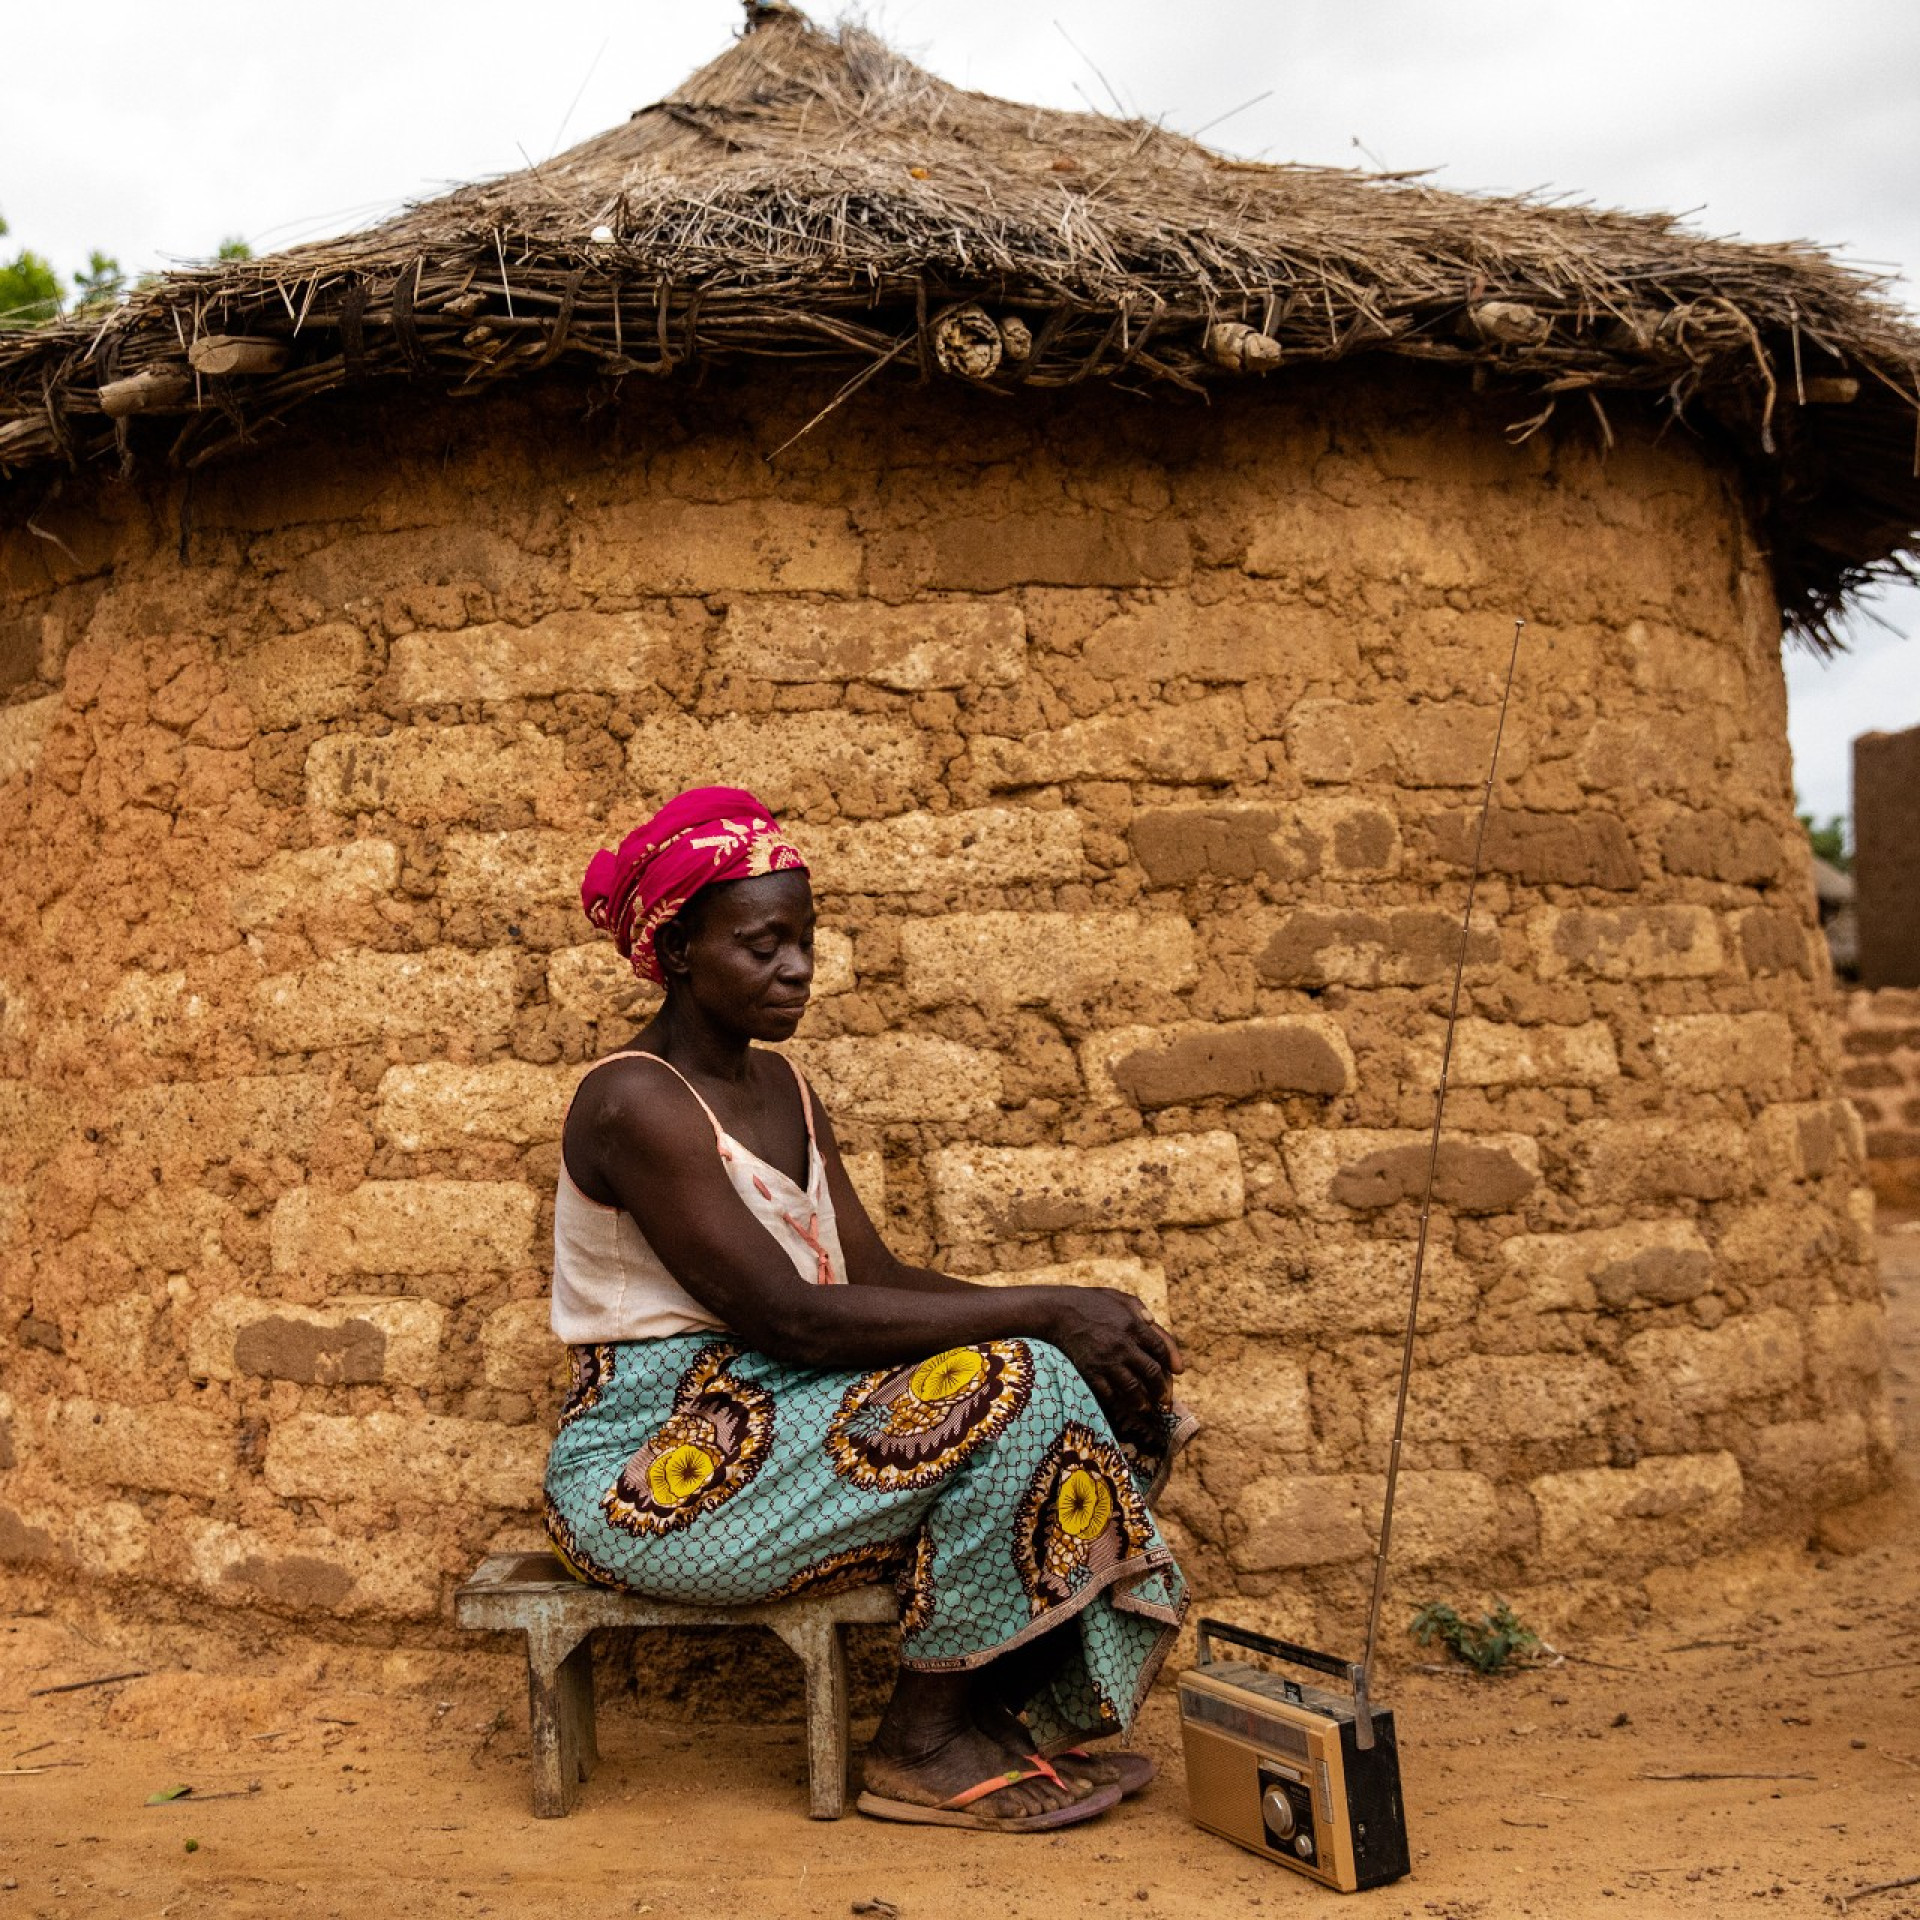 A woman sitting by a hut with a radio resembling the far reach of DMI radio campaigns